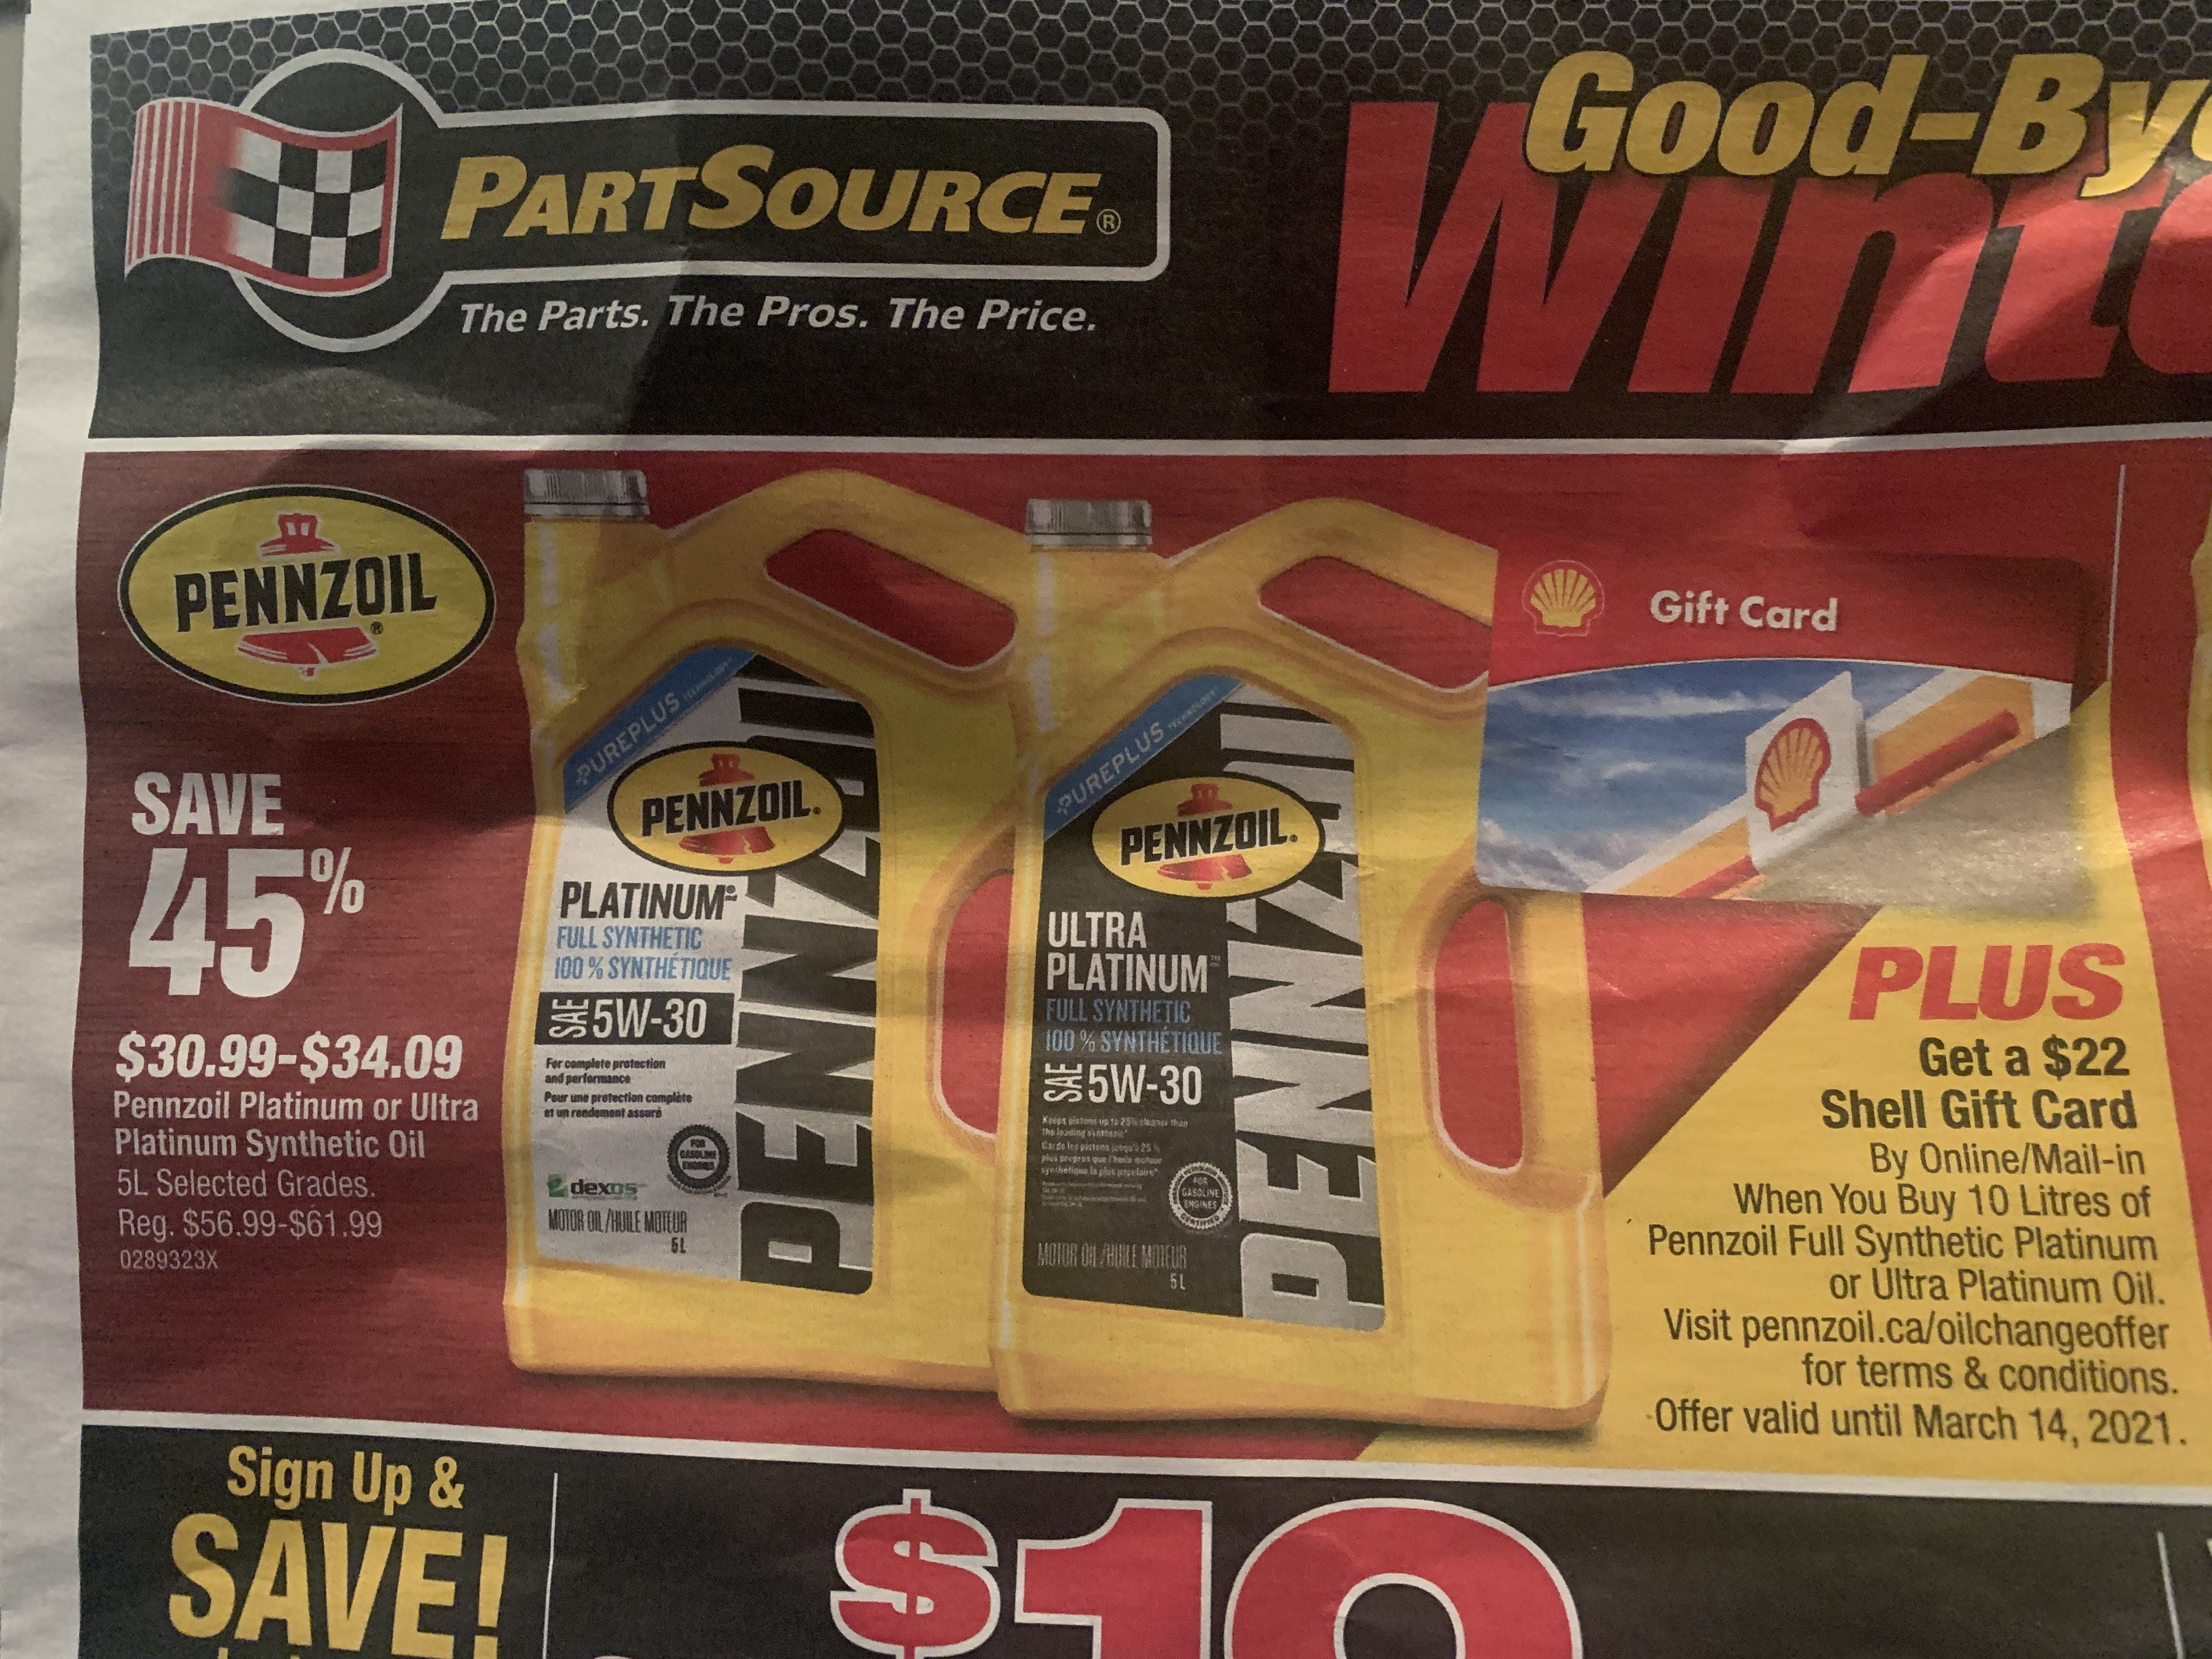 canadian-tire-pennzoil-motor-oil-buy-2-five-l-jugs-and-receive-22